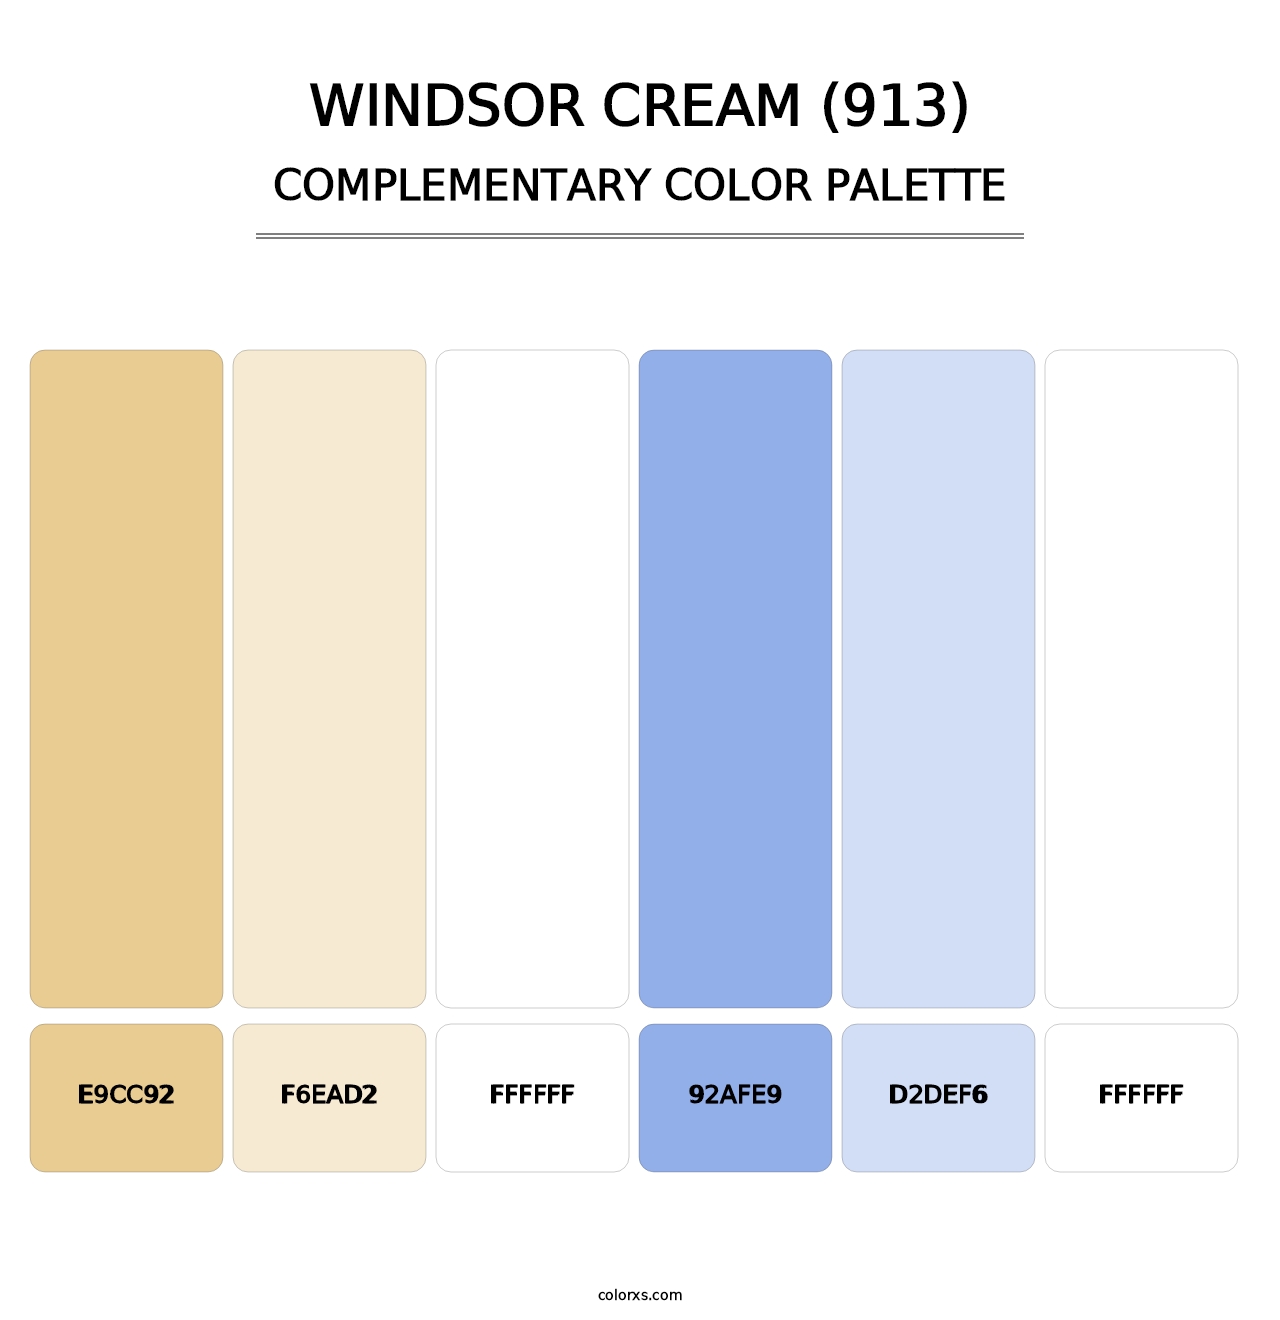 Windsor Cream (913) - Complementary Color Palette